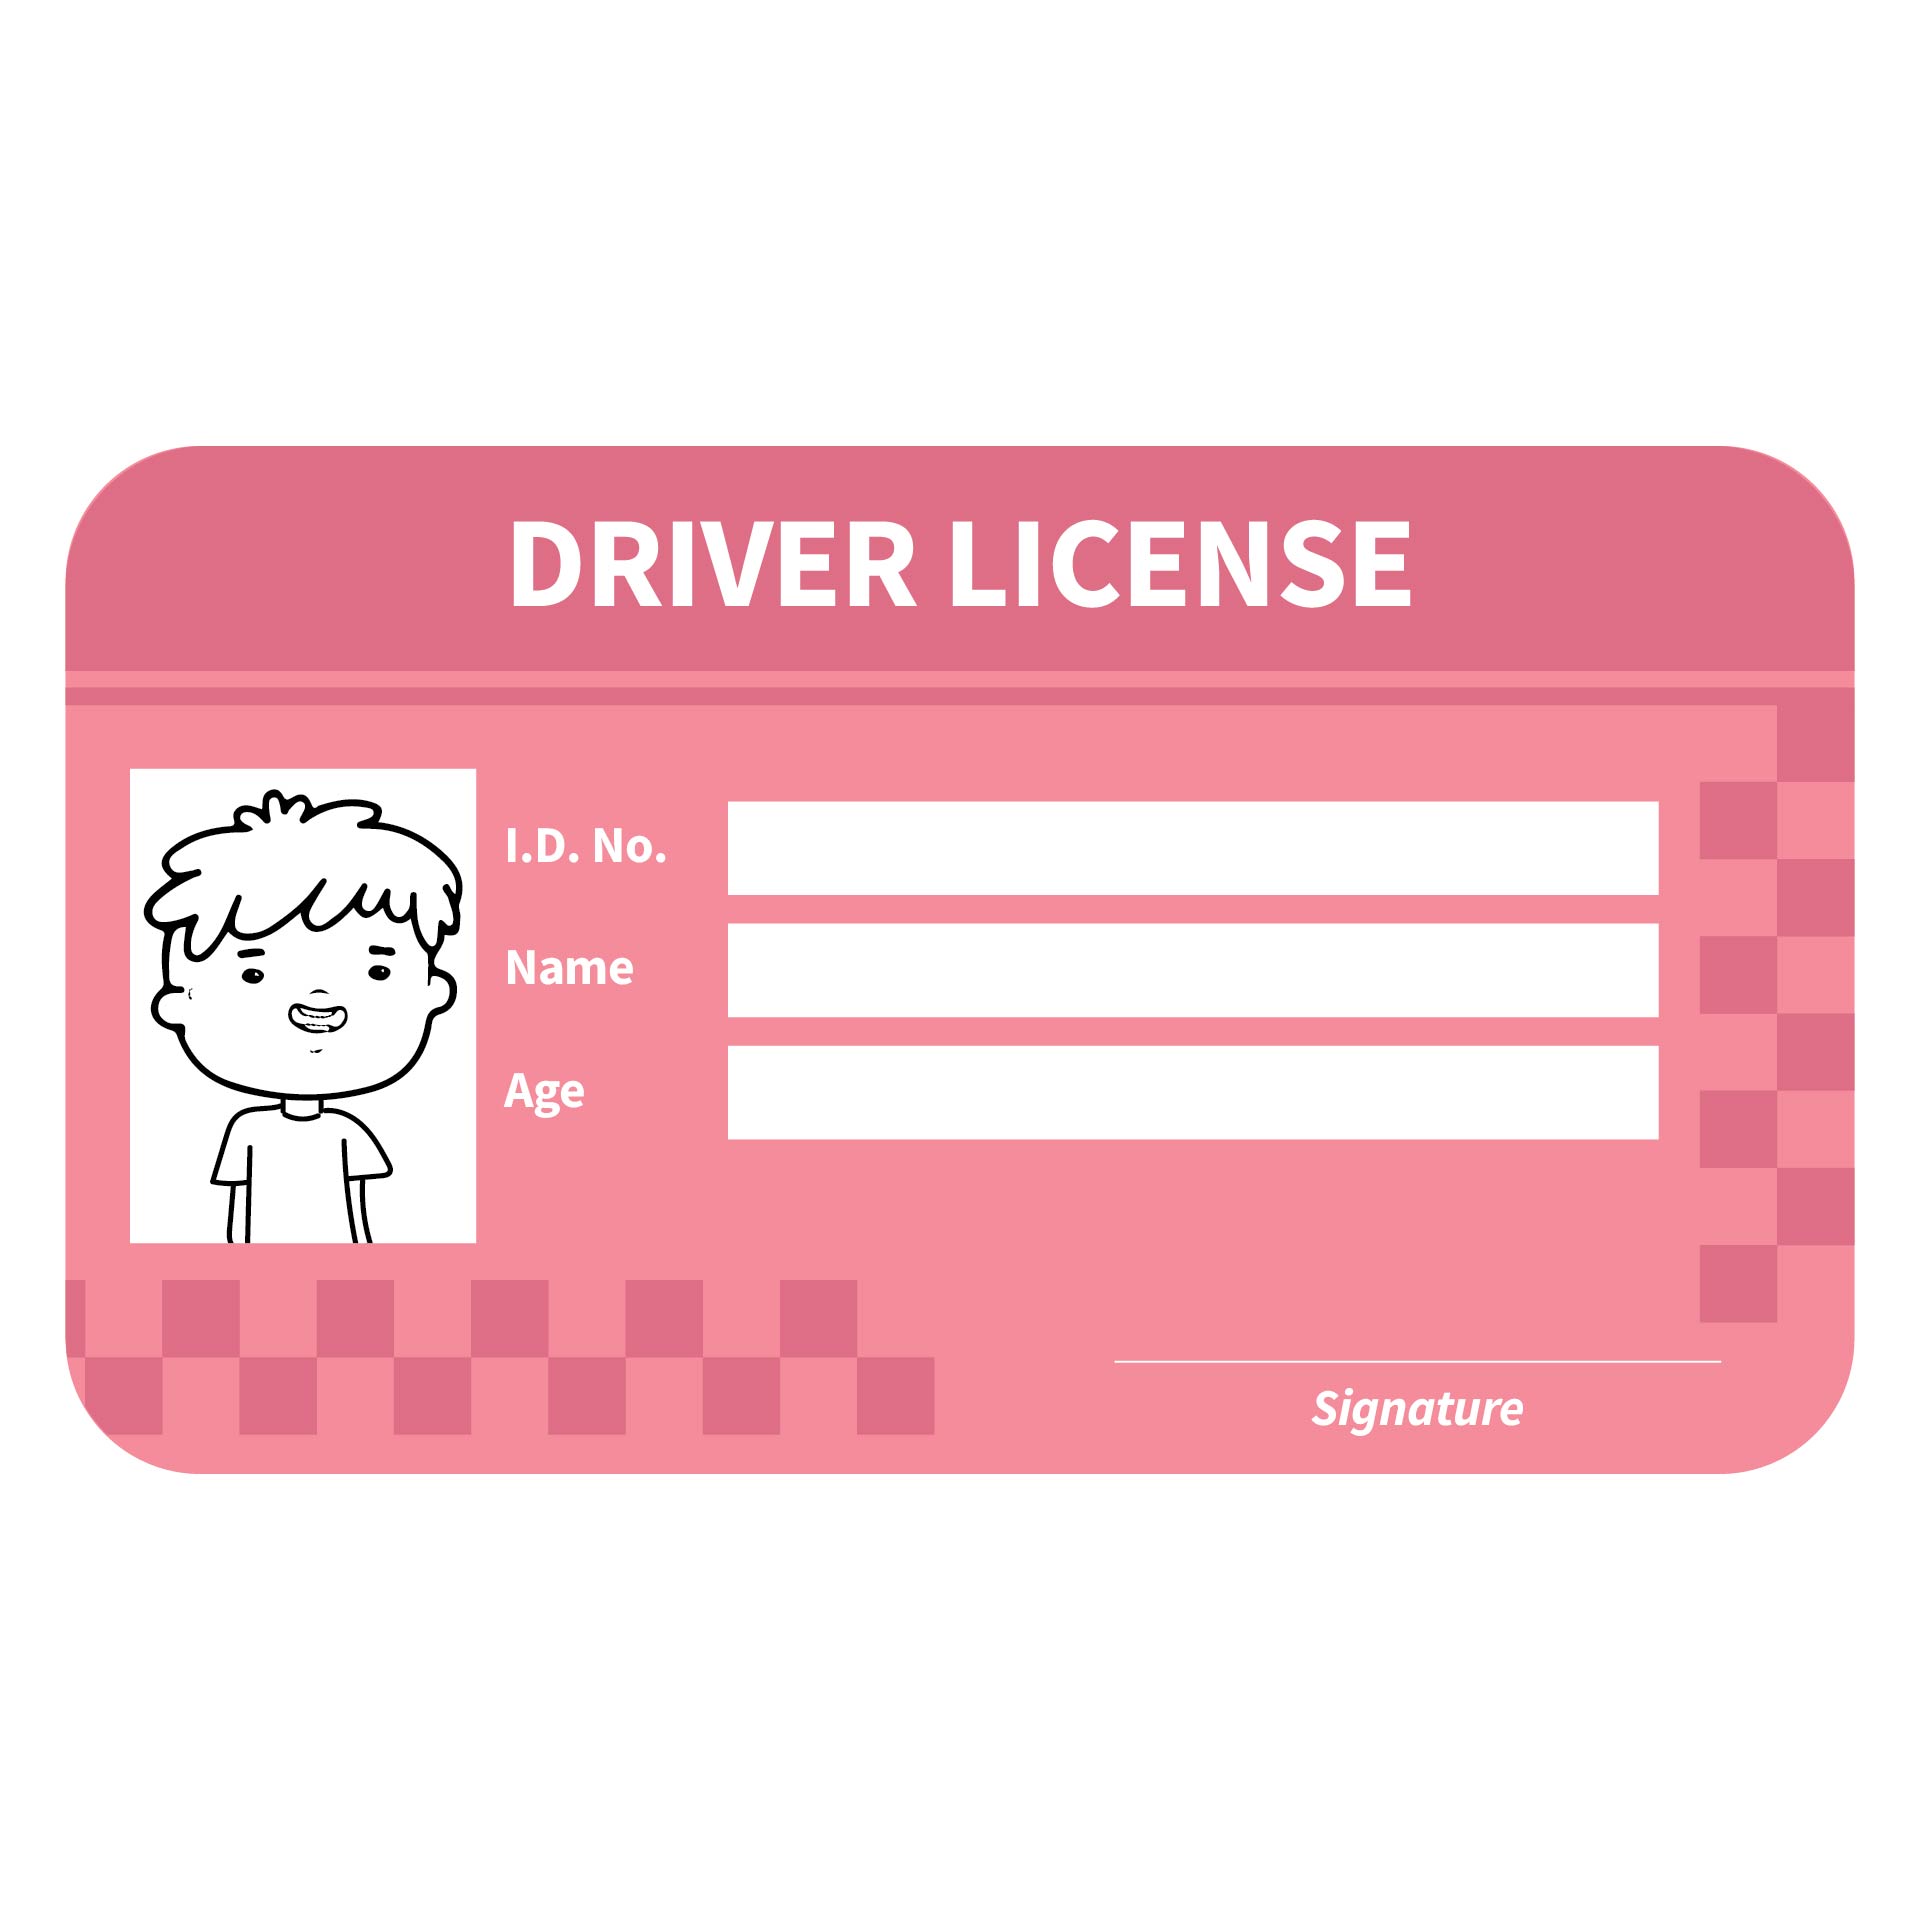 20 Best Drivers License Printable Template - printablee.com Regarding Blank Drivers License Template